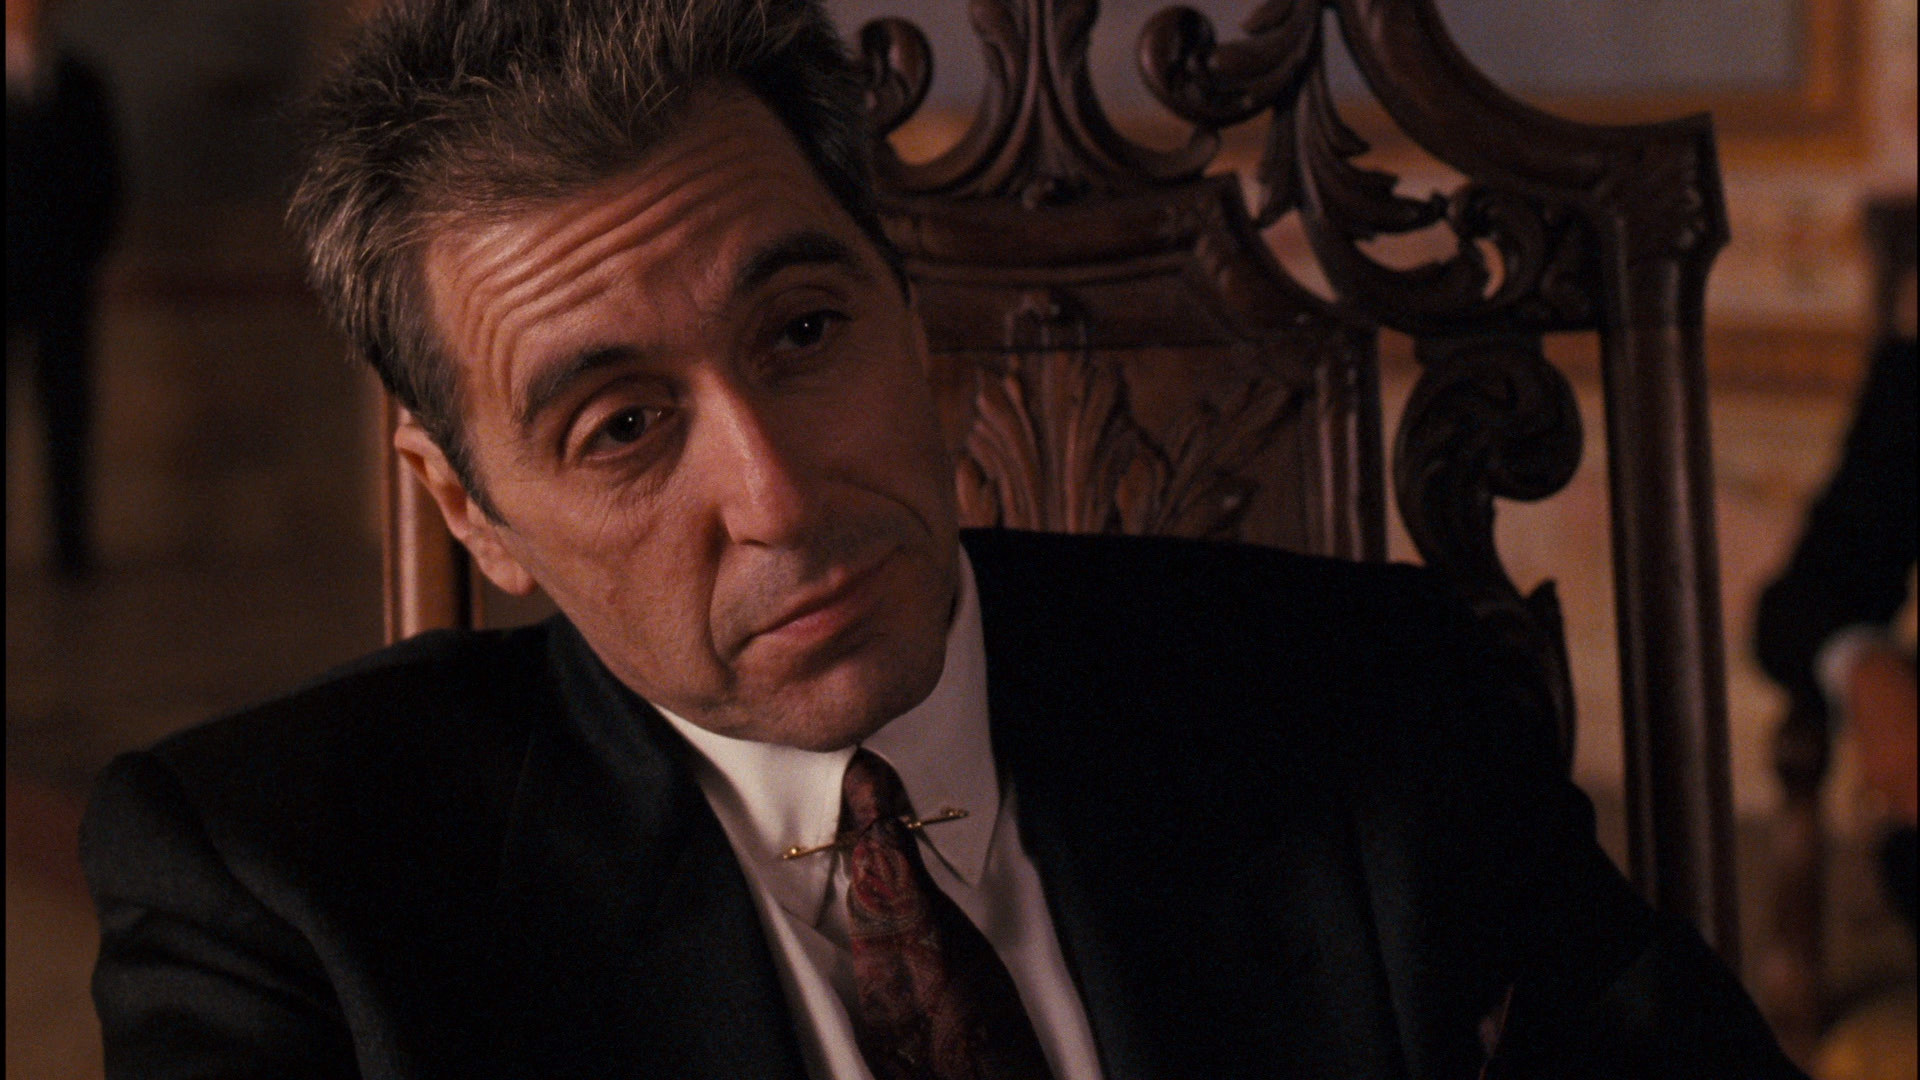 al pacino sits back as Michael Corleone in the godfather part 3